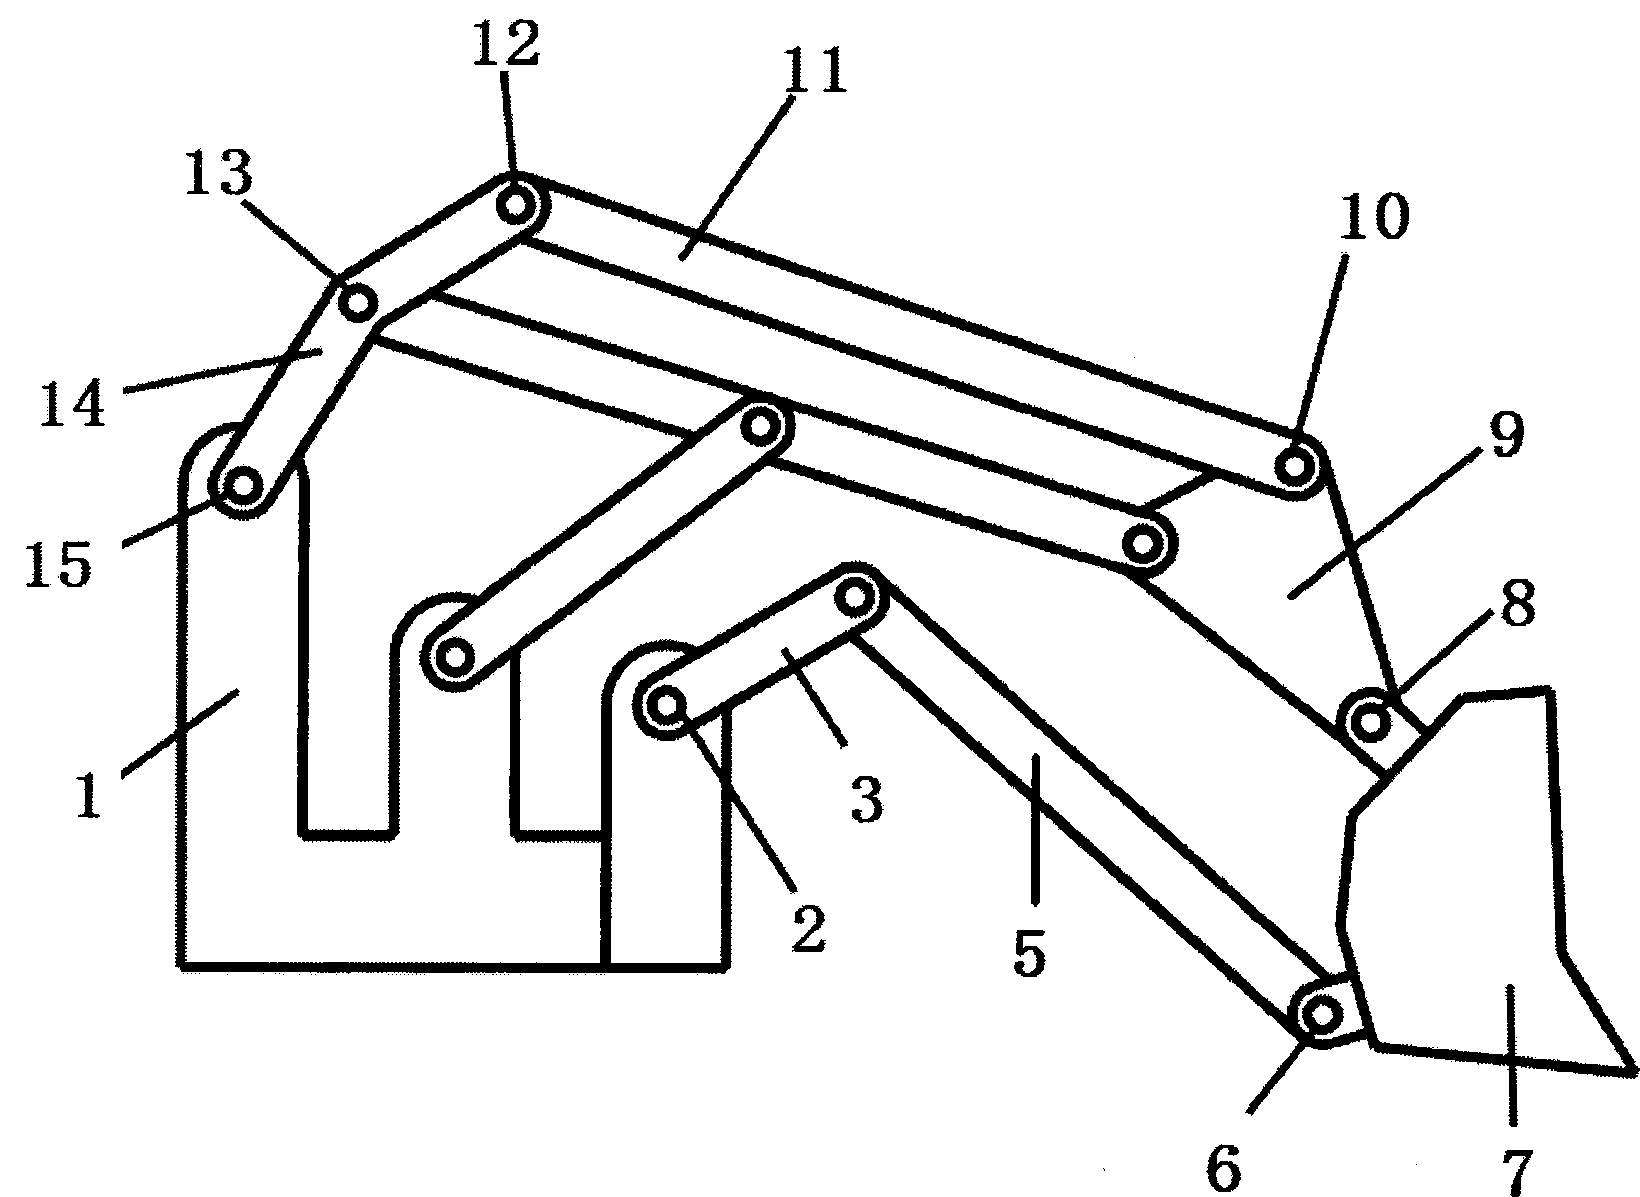 Two-DOF (degree of freedom) controllable mechanical loading mechanism